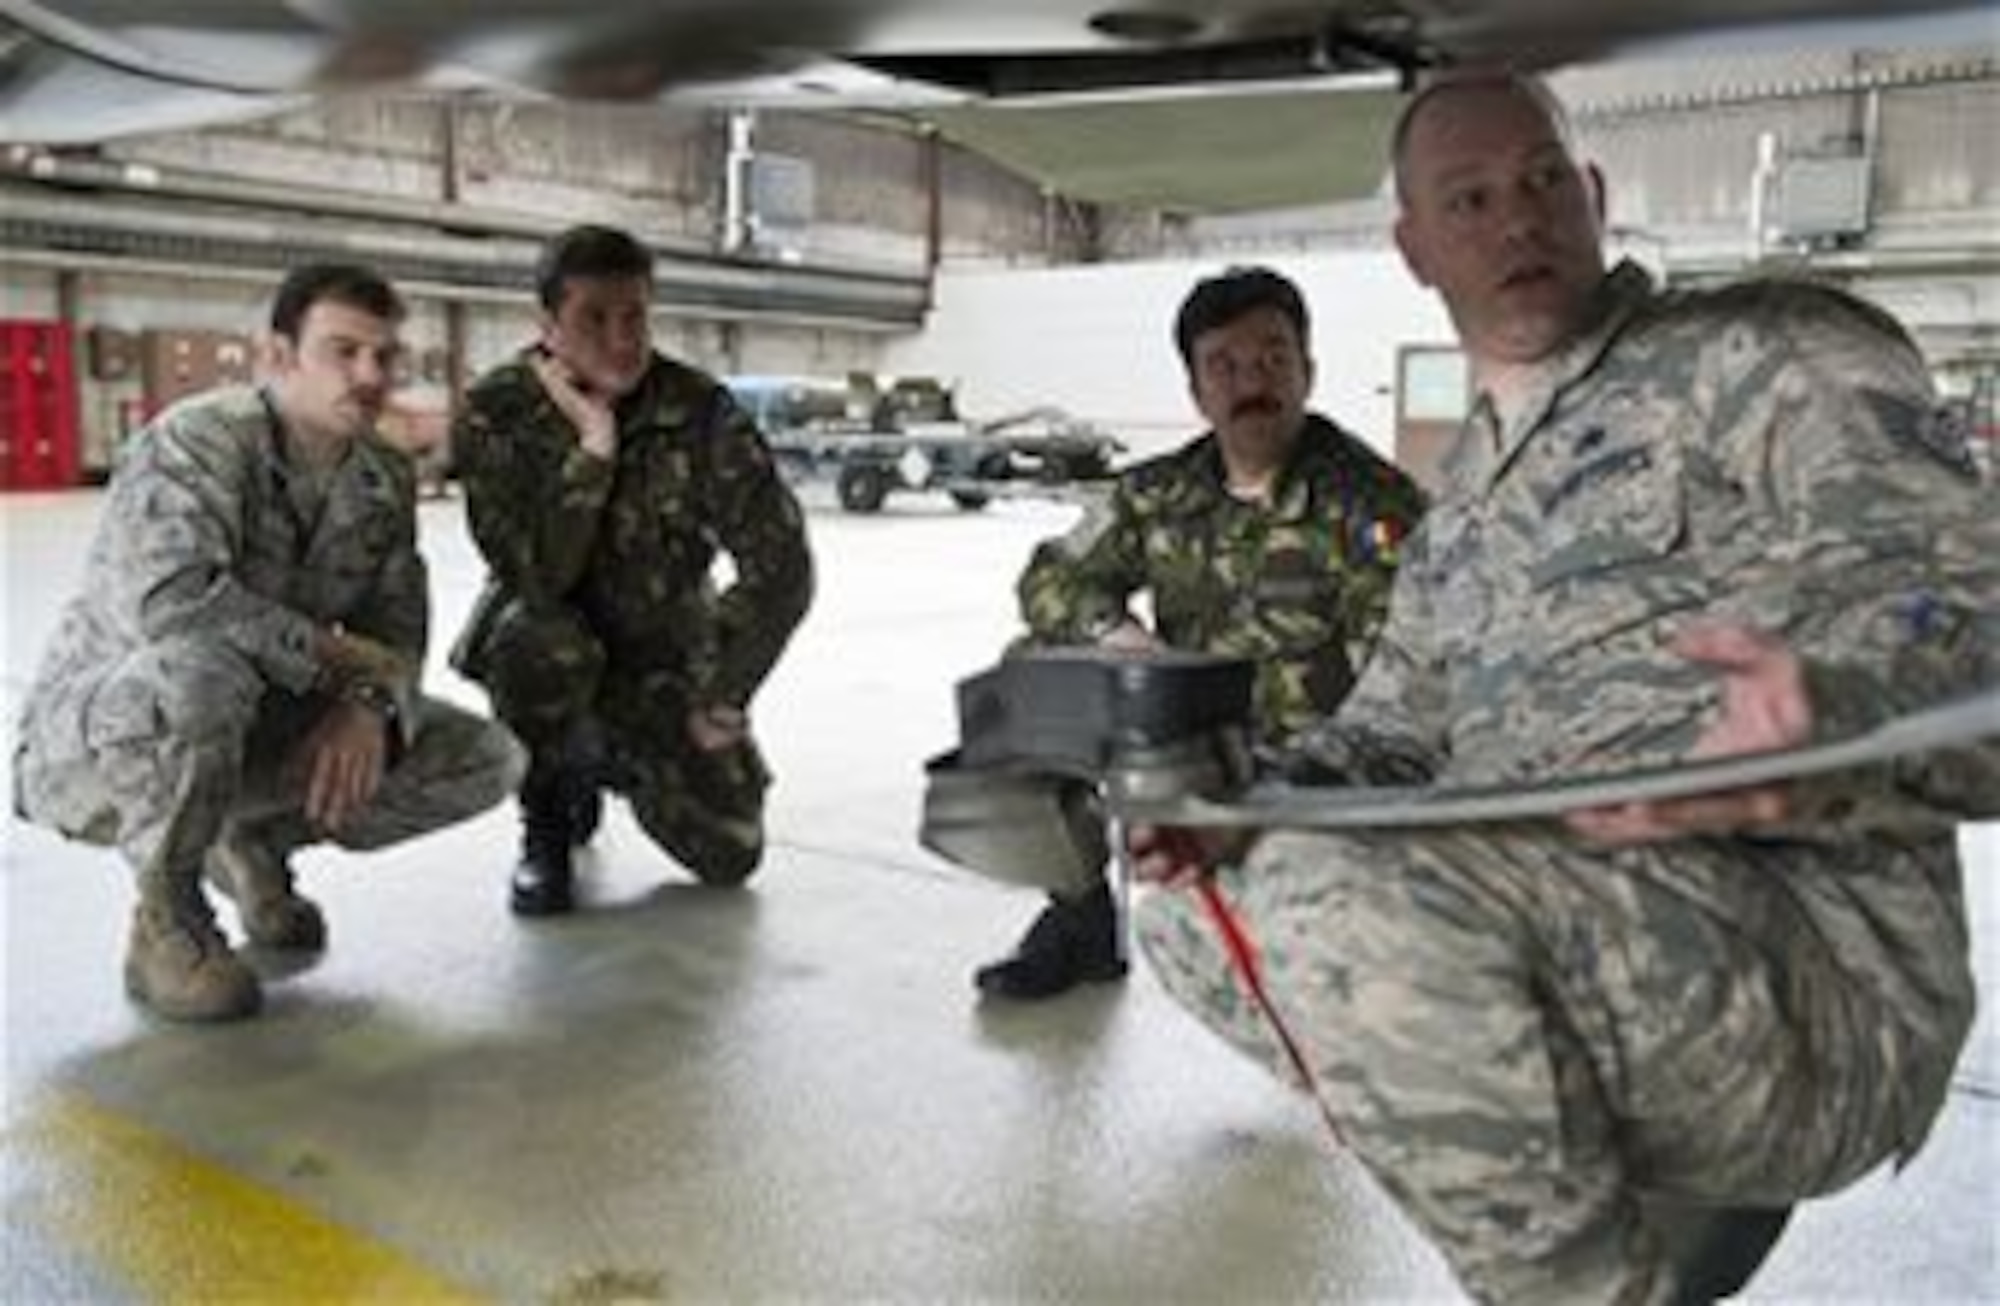 U.S. Air Force Tech. Sgt. John Lyon, 52nd Aircraft Maintenance Squadron crew chief, explains F-16 Fighting Falcon fighter aircraft capabilities to members of the Romanian air force during a familiarization tour at Spangdahlem Air Base, Germany, March 25, 2014. The Romanian air force, who recently entered a contract to purchase 12 F-16s, visited Spangdahlem to gain insight into F-16 operations, maintenance and support. (U.S. Air Force photo by Staff Sgt. Chad Warren/Released)